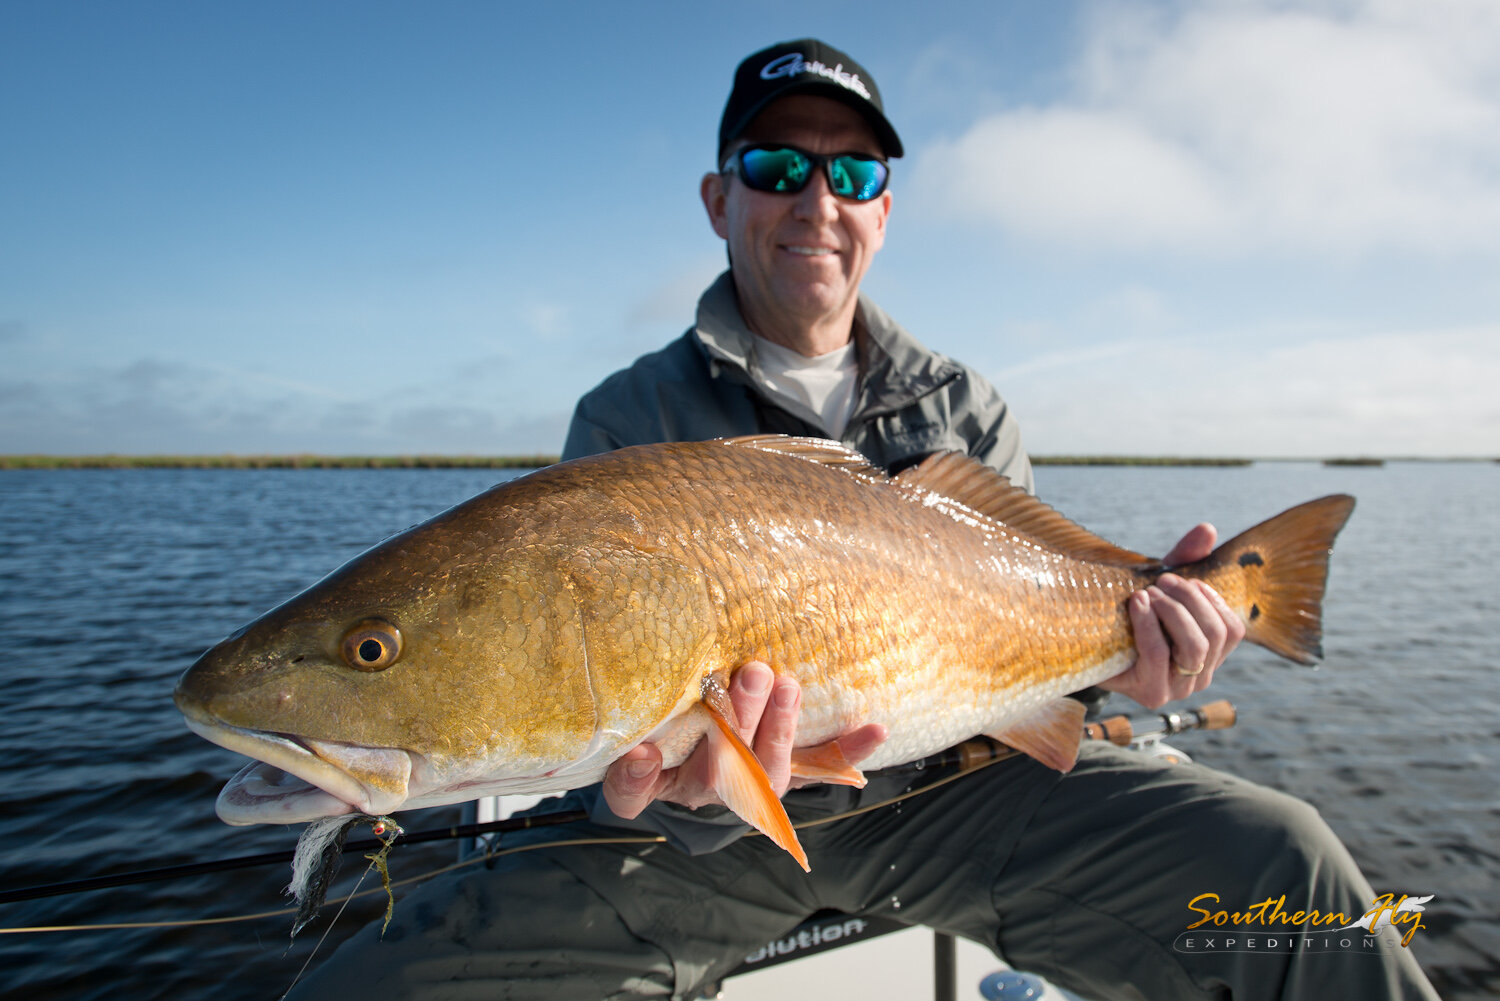 2020-03-12-13_SouthernFlyExpeditions_NewOrleans_DonKlingler-1.jpg